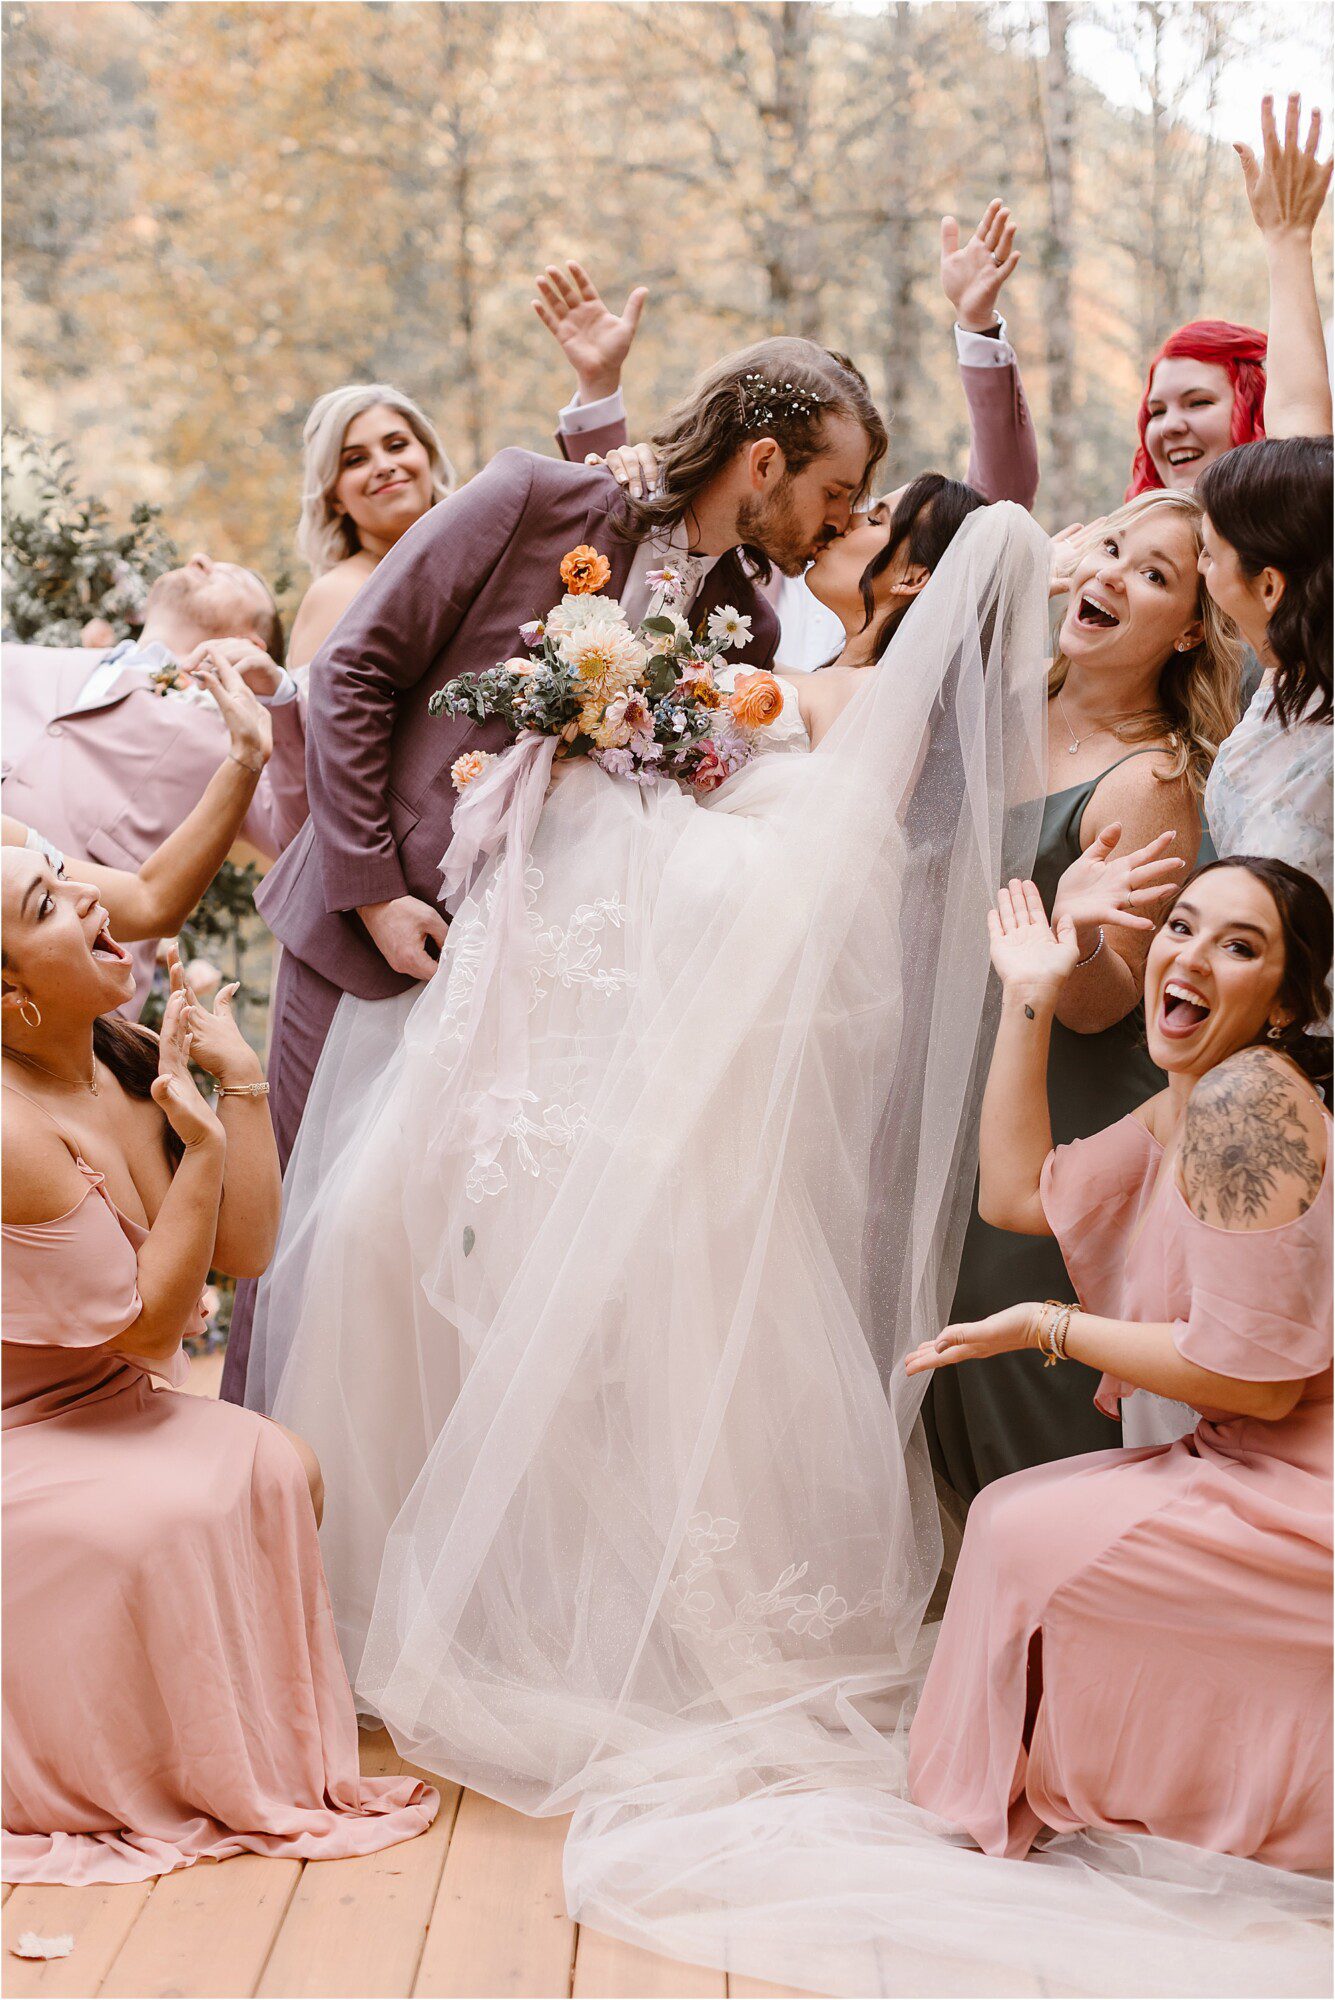 groom dips back bride and kisses her surrounded by bridesmaids and groomsmen